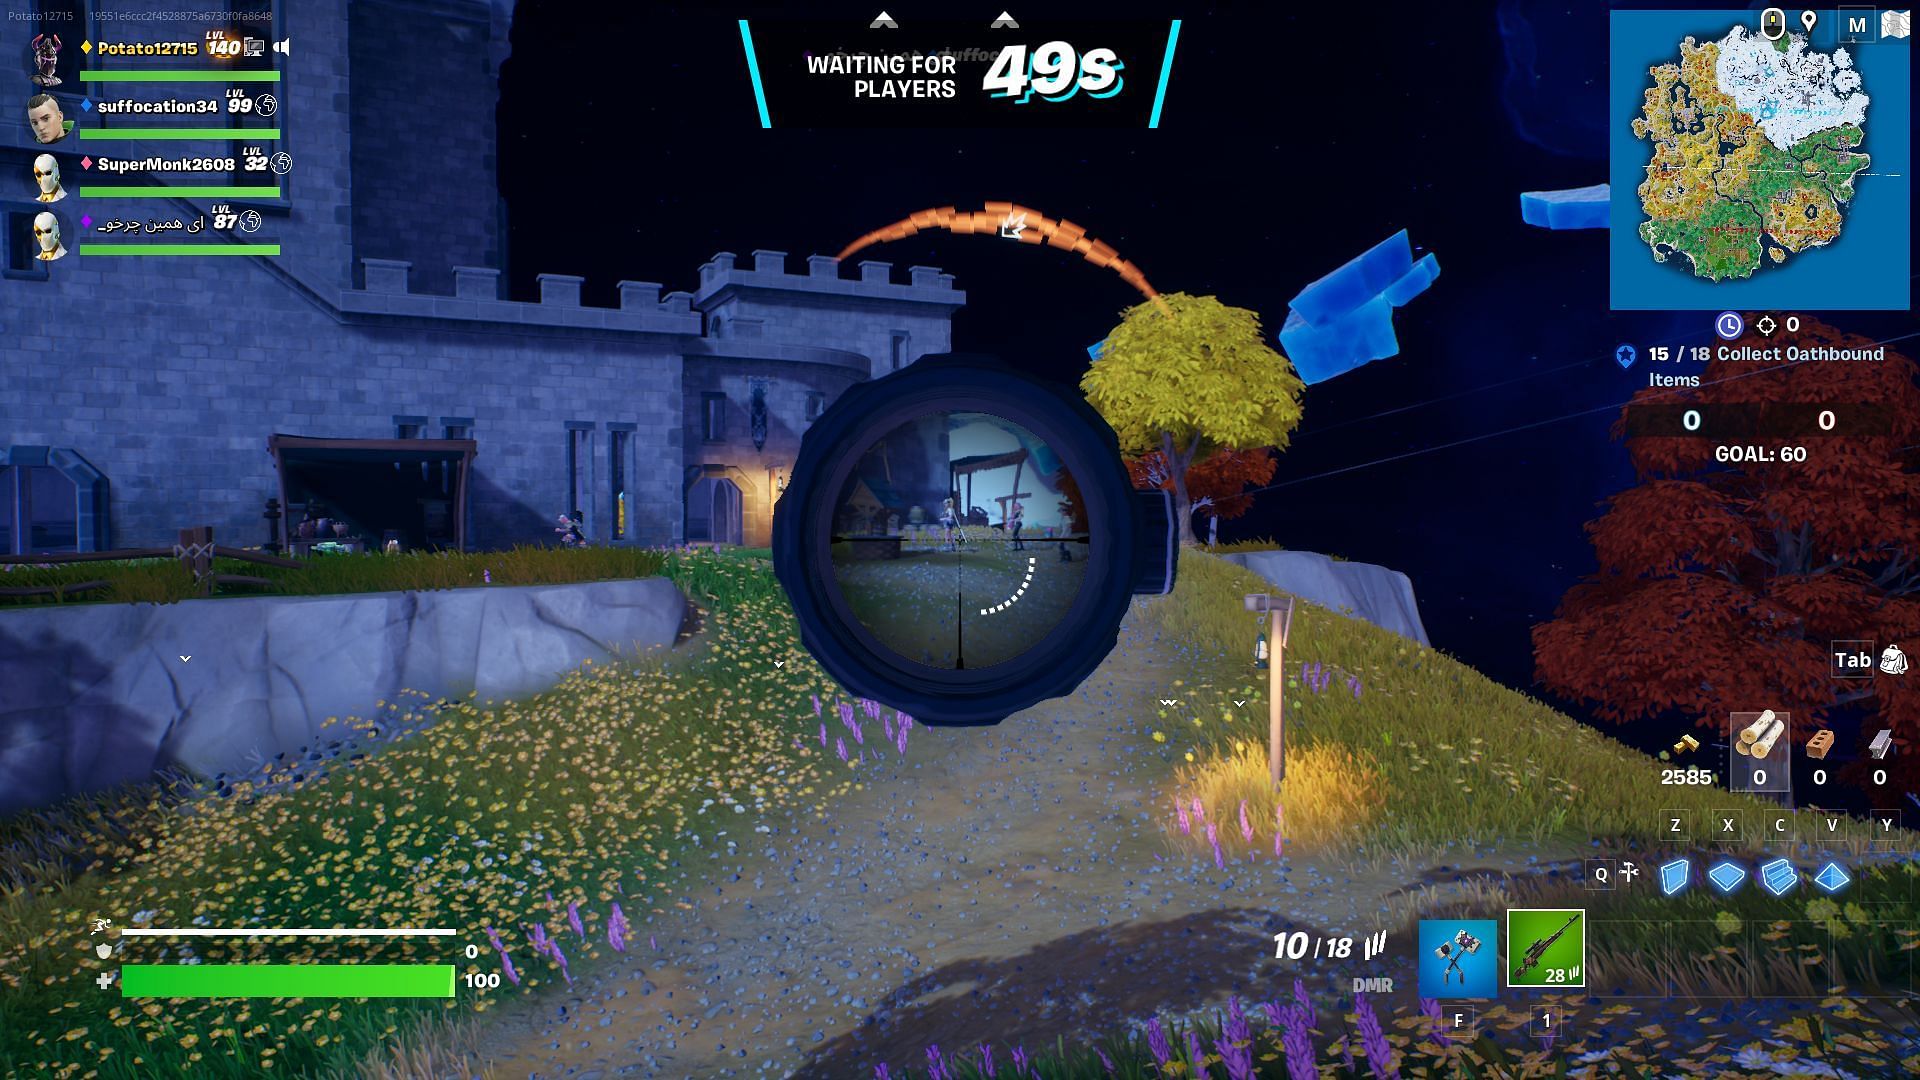 DMR is broken when the first-person glitch is activated (Image via Epic Games/Fortnite)